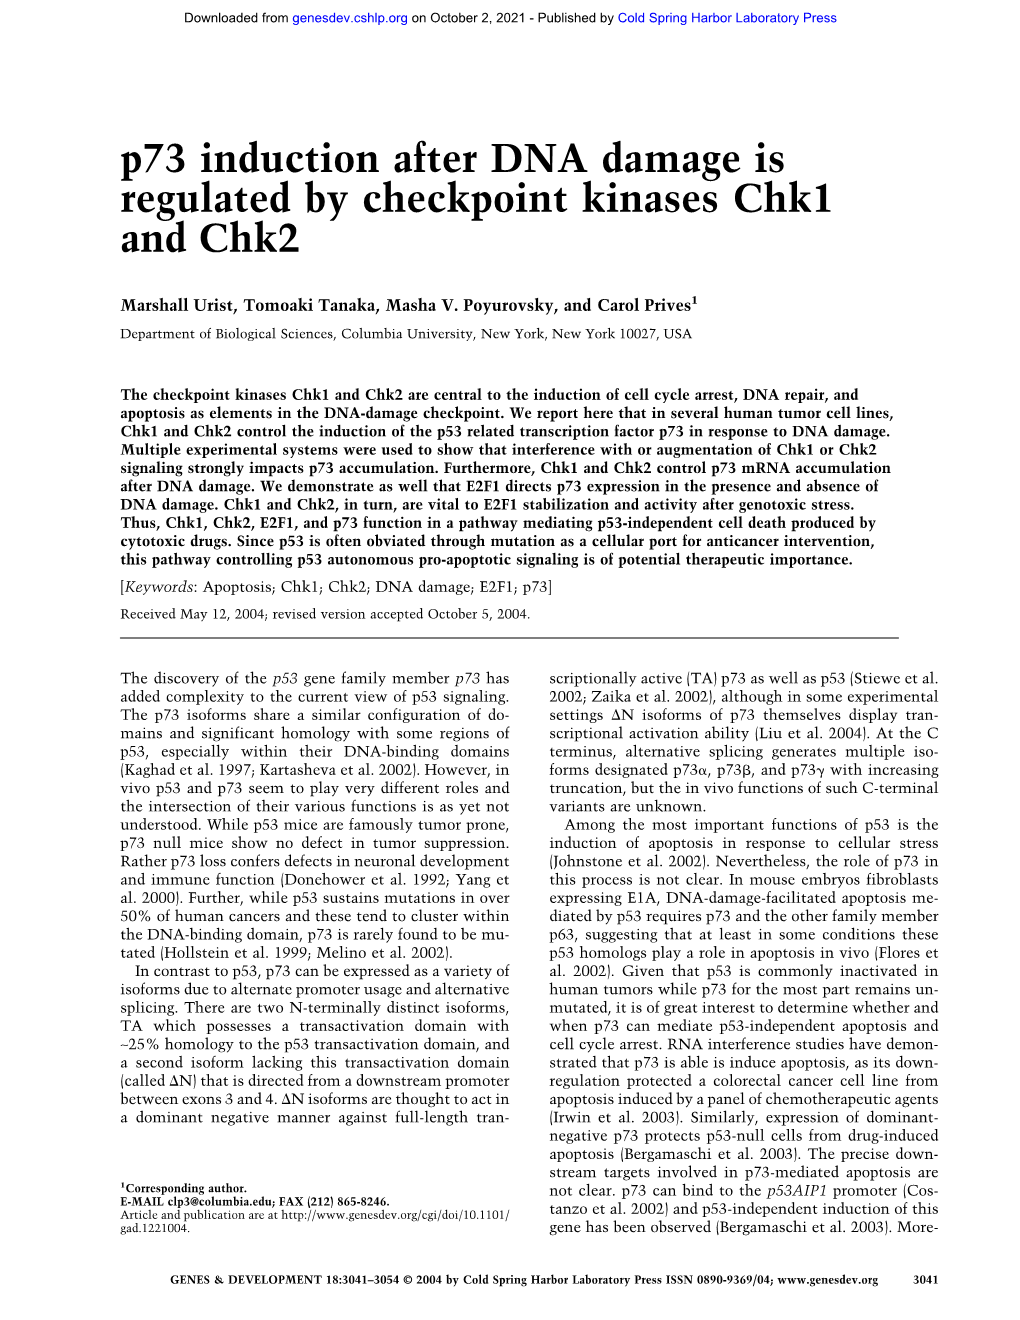 P73 Induction After DNA Damage Is Regulated by Checkpoint Kinases Chk1 and Chk2